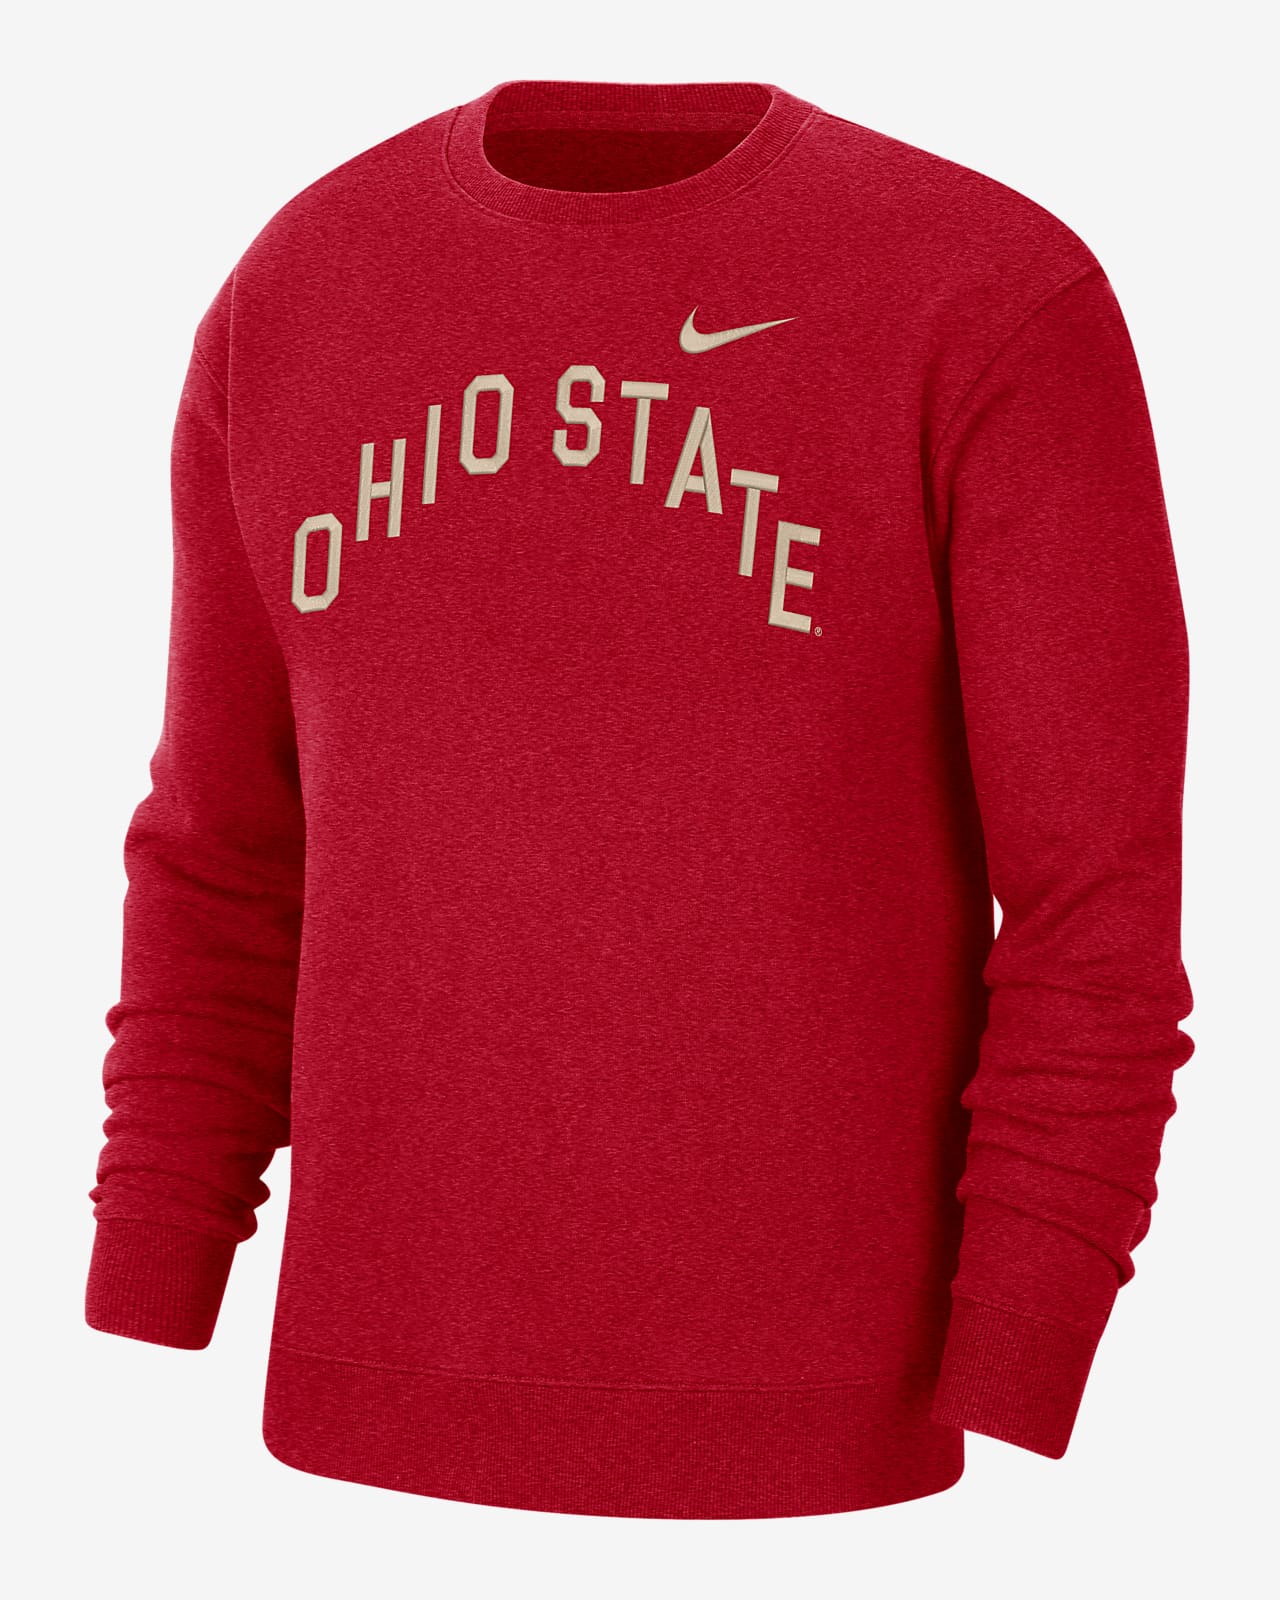 Best Ohio State gifts: Jerseys, hats, sweatshirts, and more